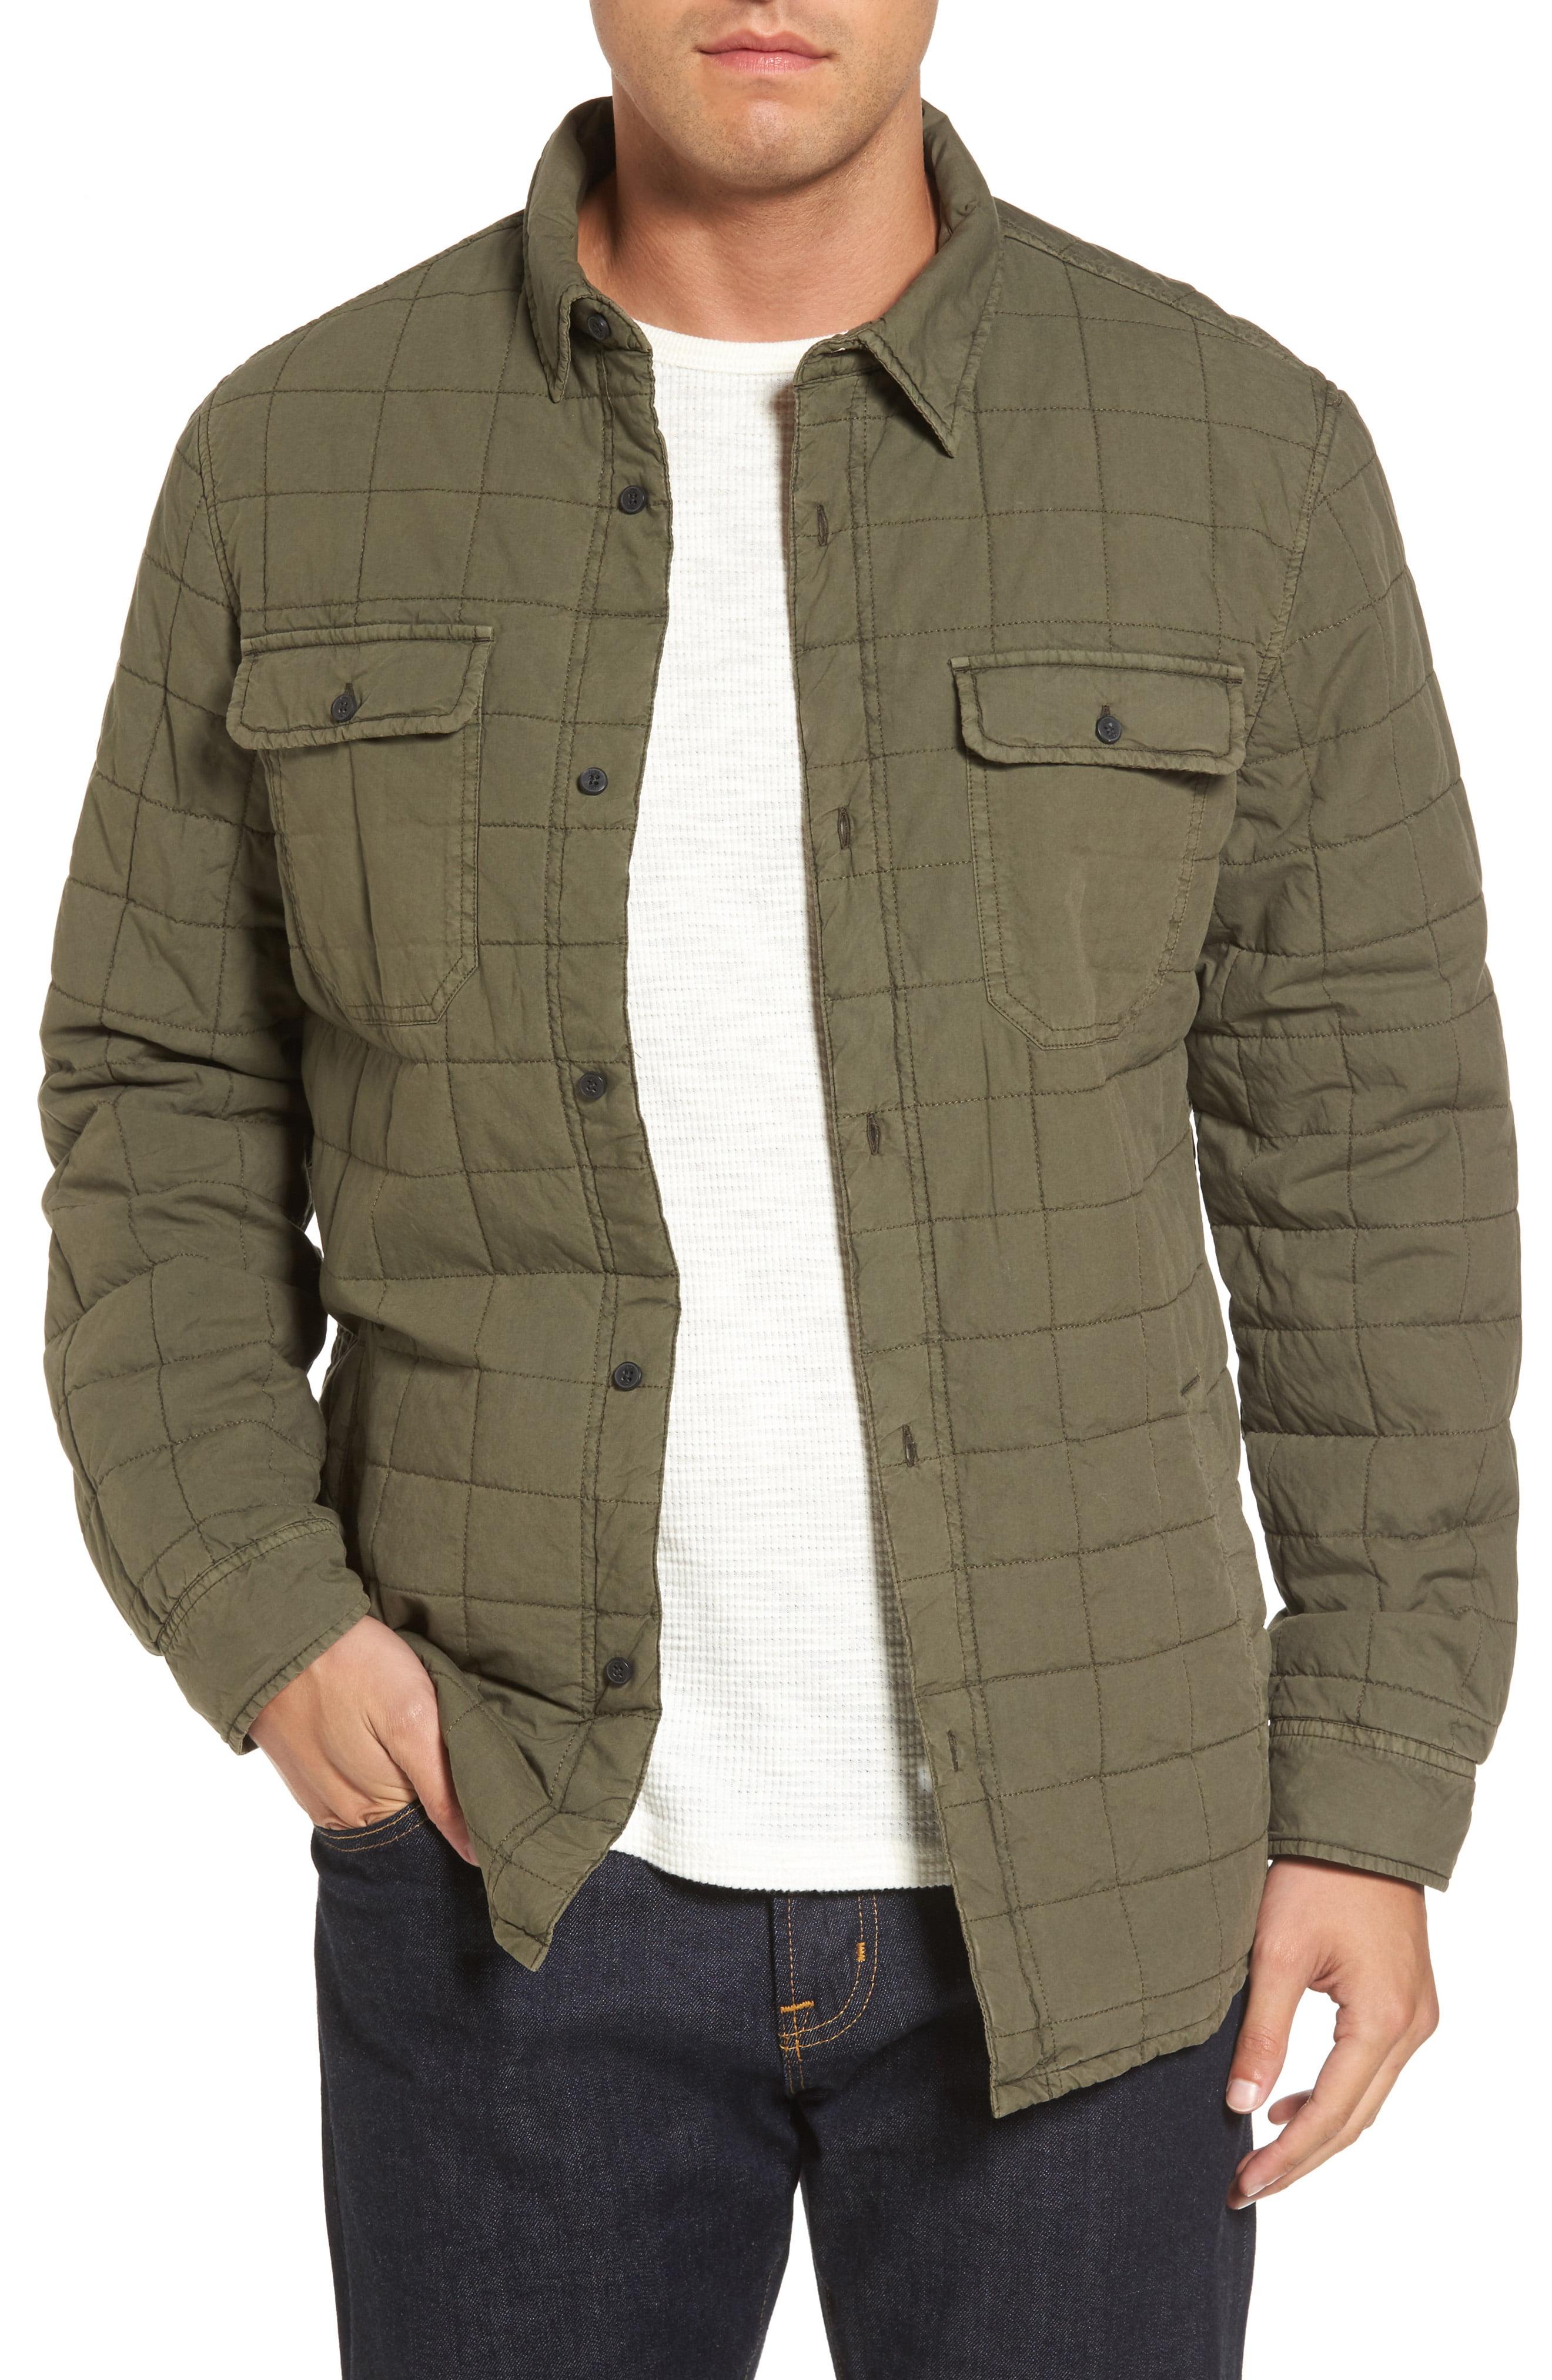 UGG Cotton UGG Quilted Shirt Jacket in Olive (Green) for Men - Lyst